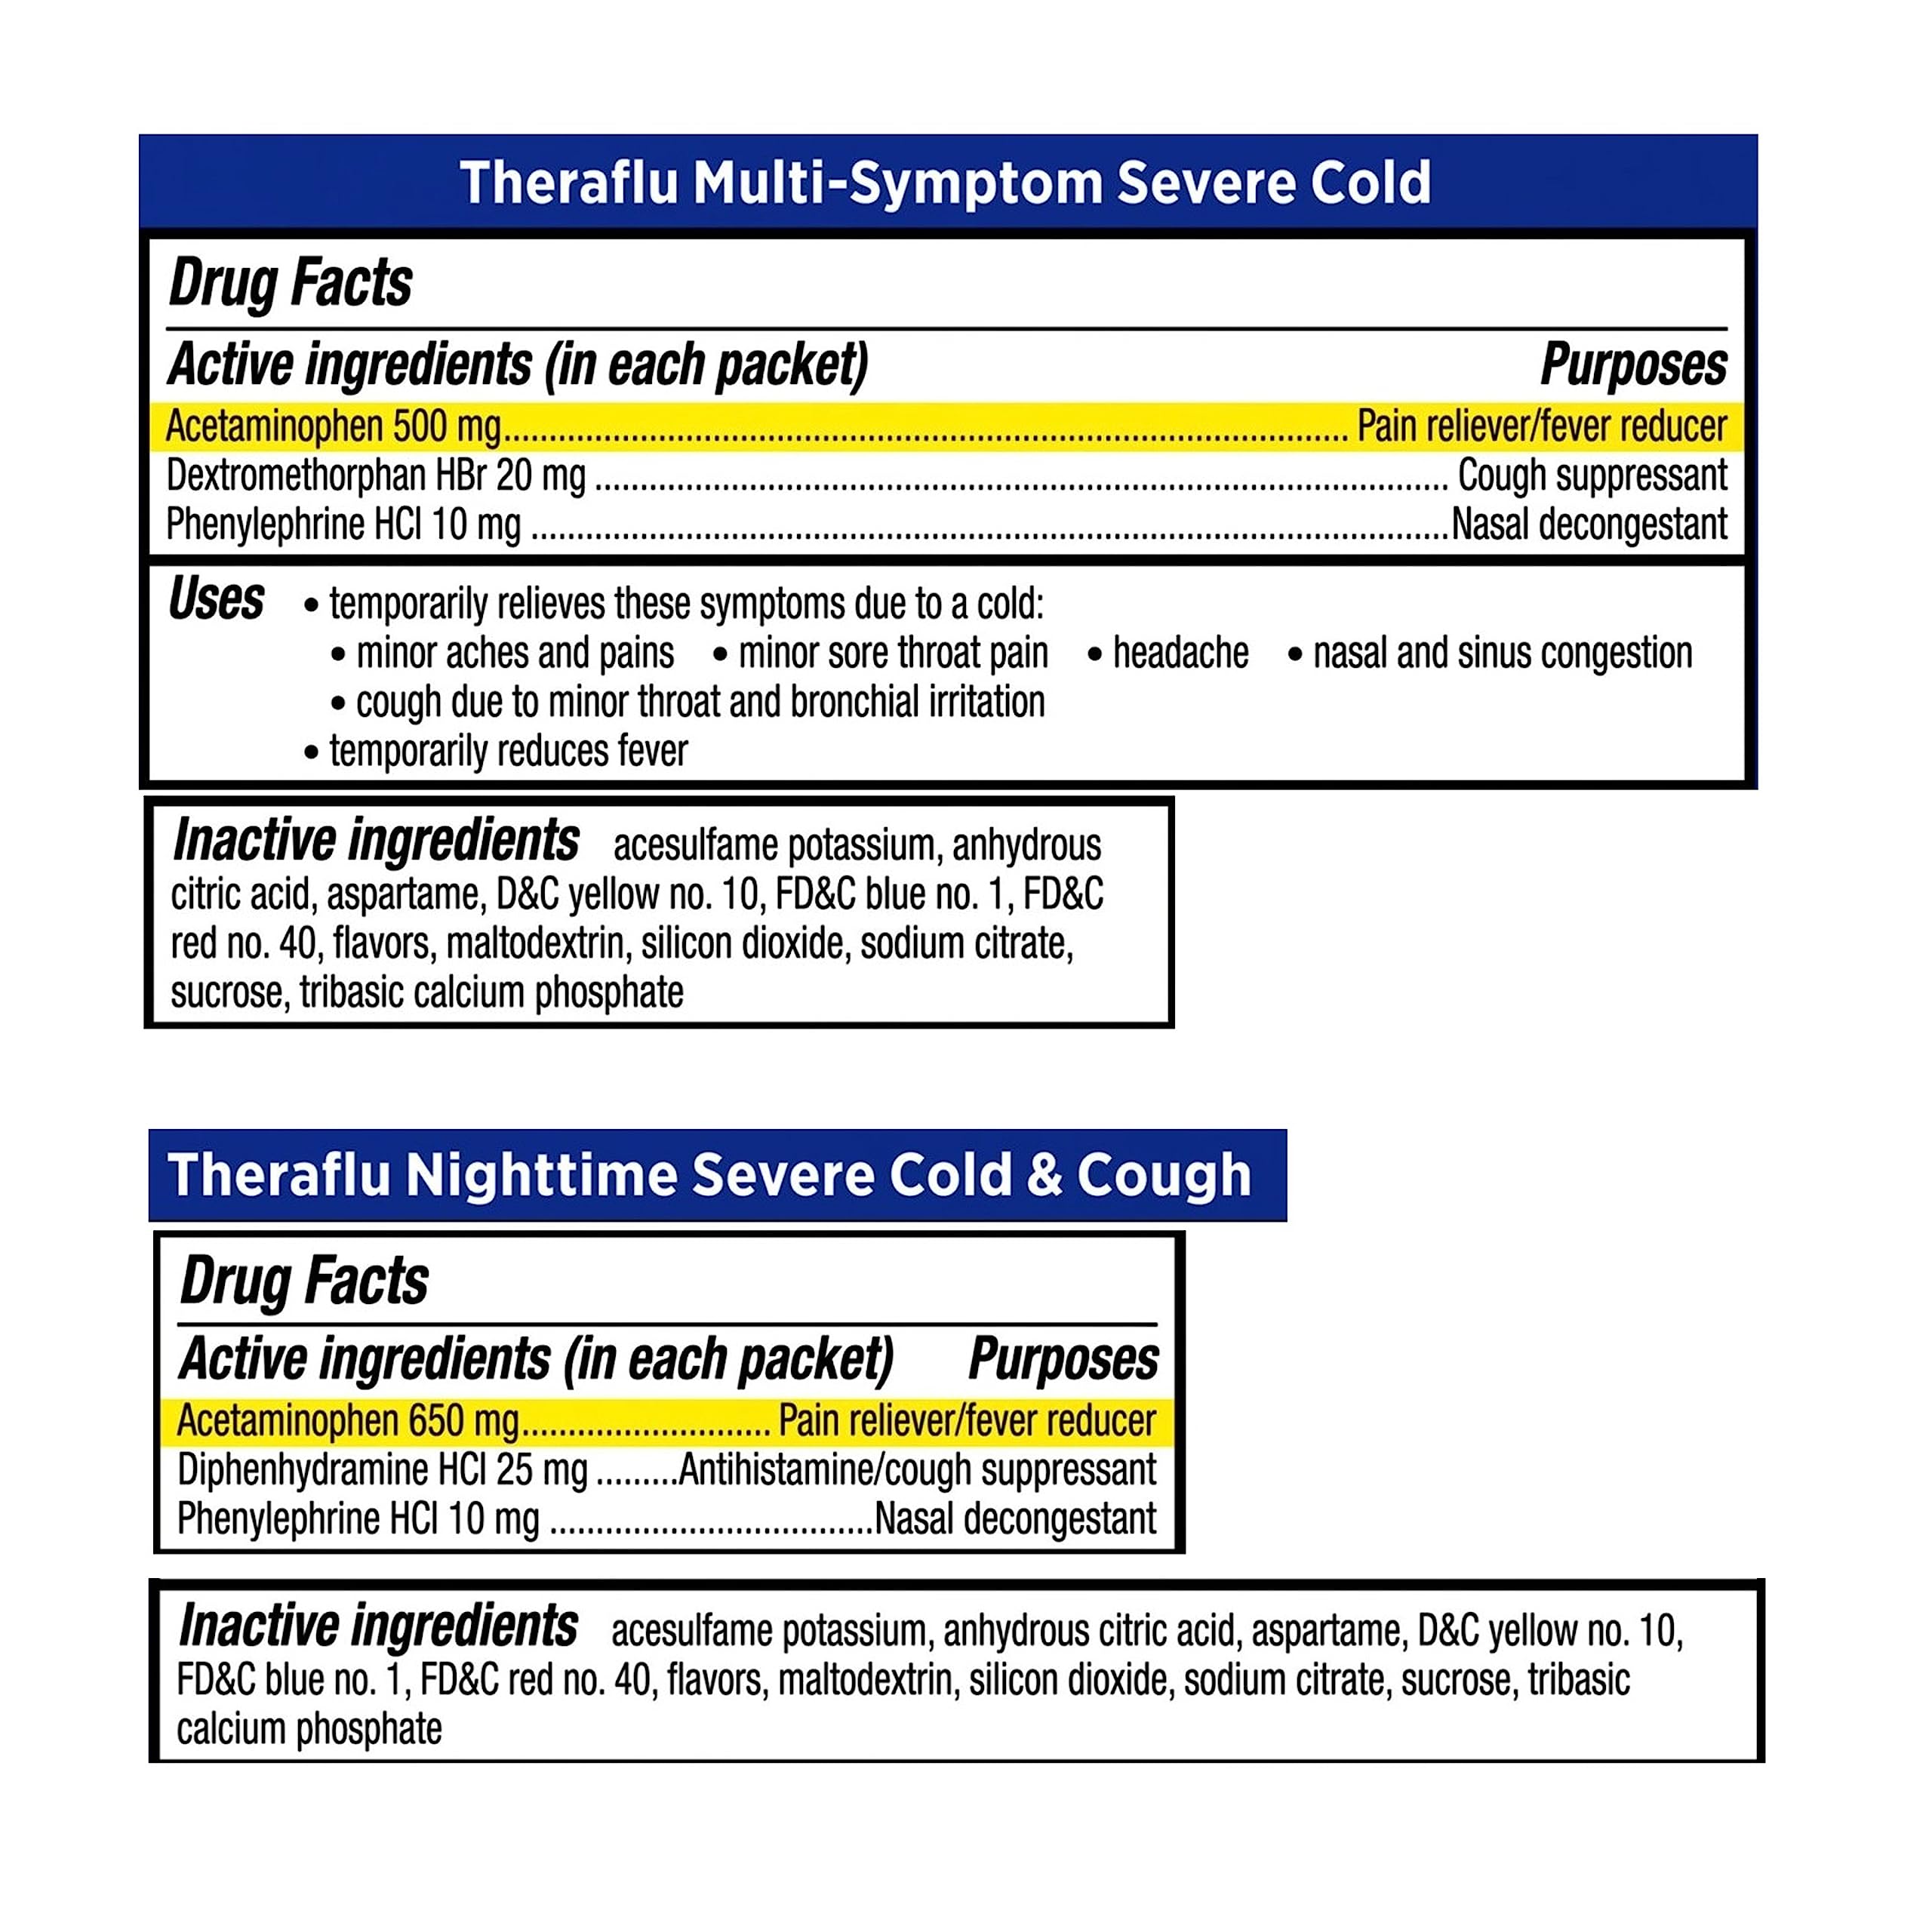 Theraflu Combo Daytime and Nighttime Severe Cold Relief Powder, Honey Lemon Flavor, 12 Count, 6 Daytime and 6 Nighttime